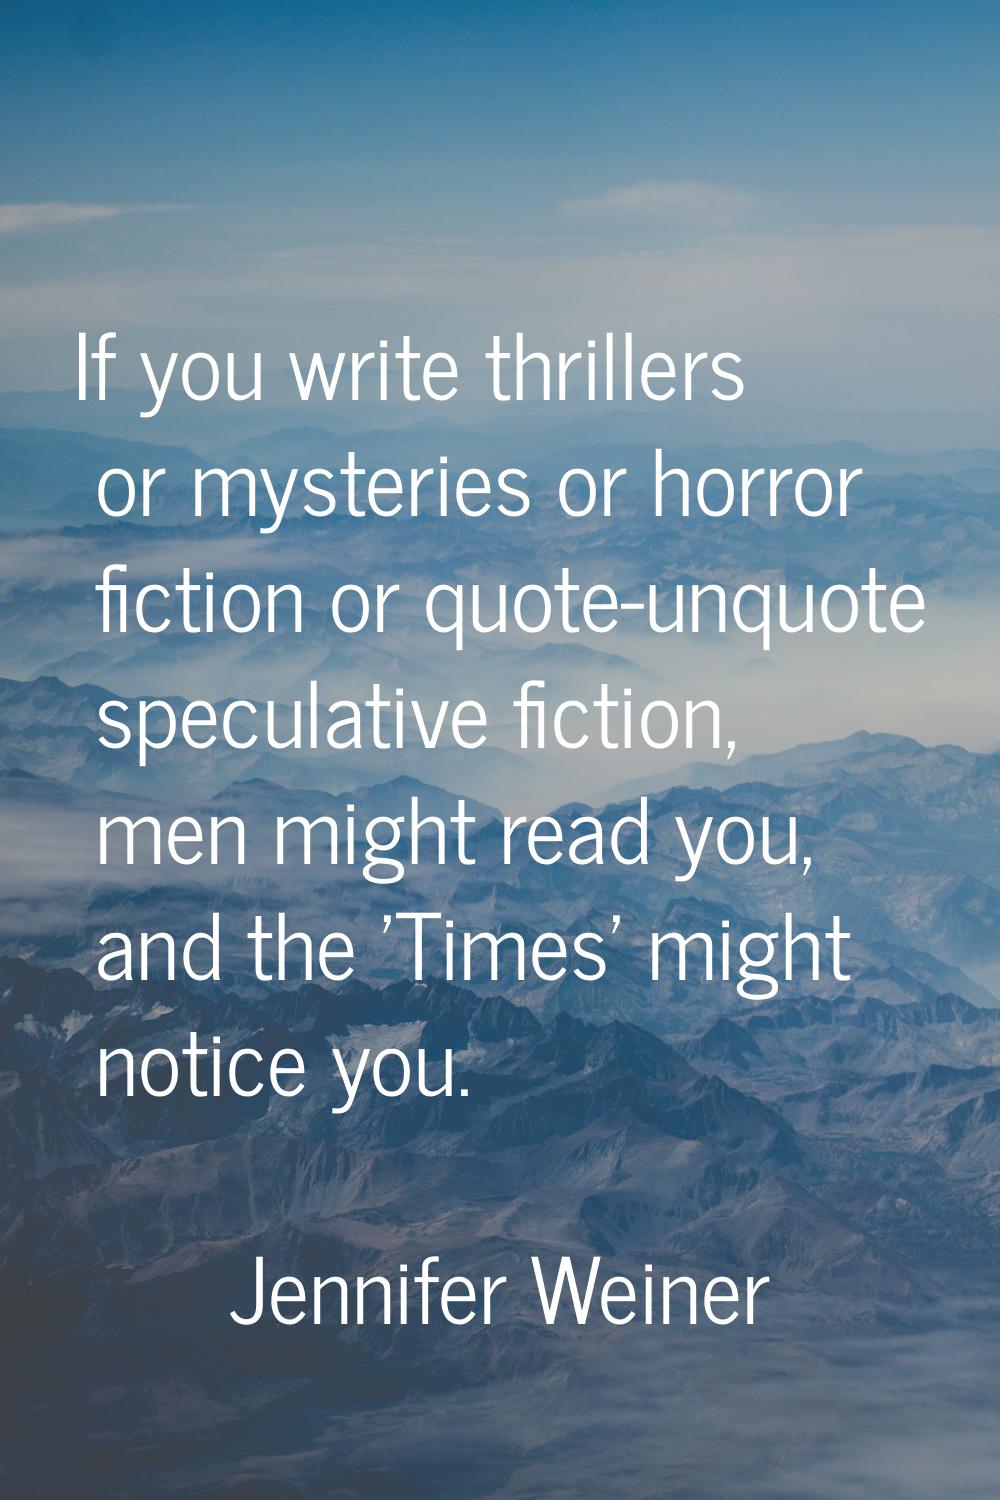 If you write thrillers or mysteries or horror fiction or quote-unquote speculative fiction, men mig